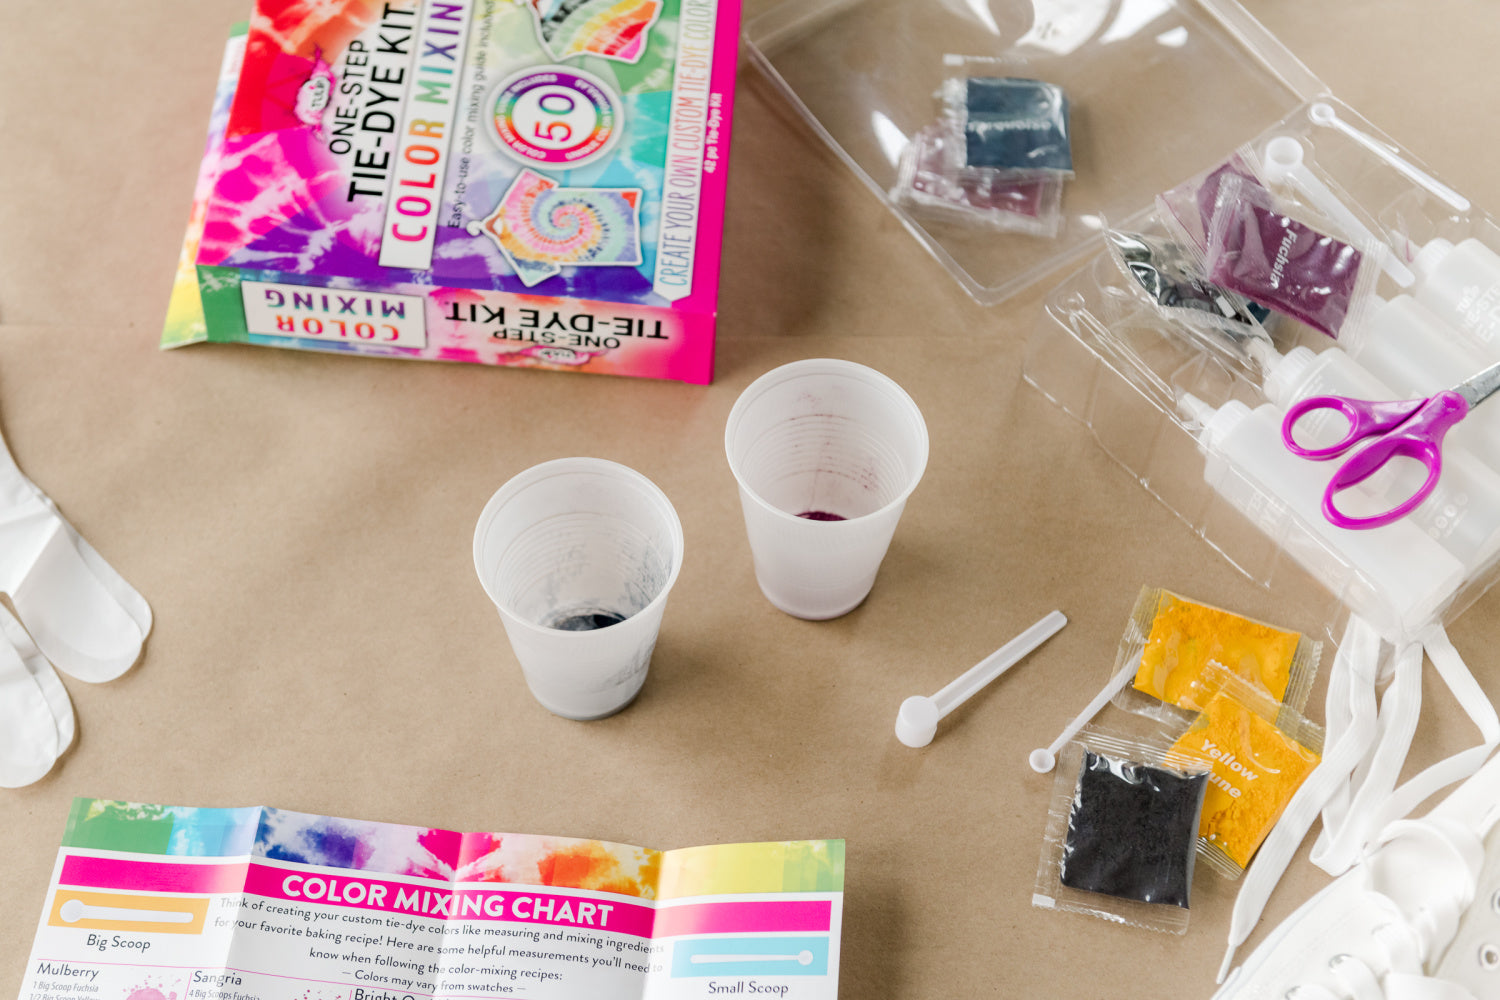 Custom tie-dye colors with the Tulip Color Mixing Tie-Dye Kit